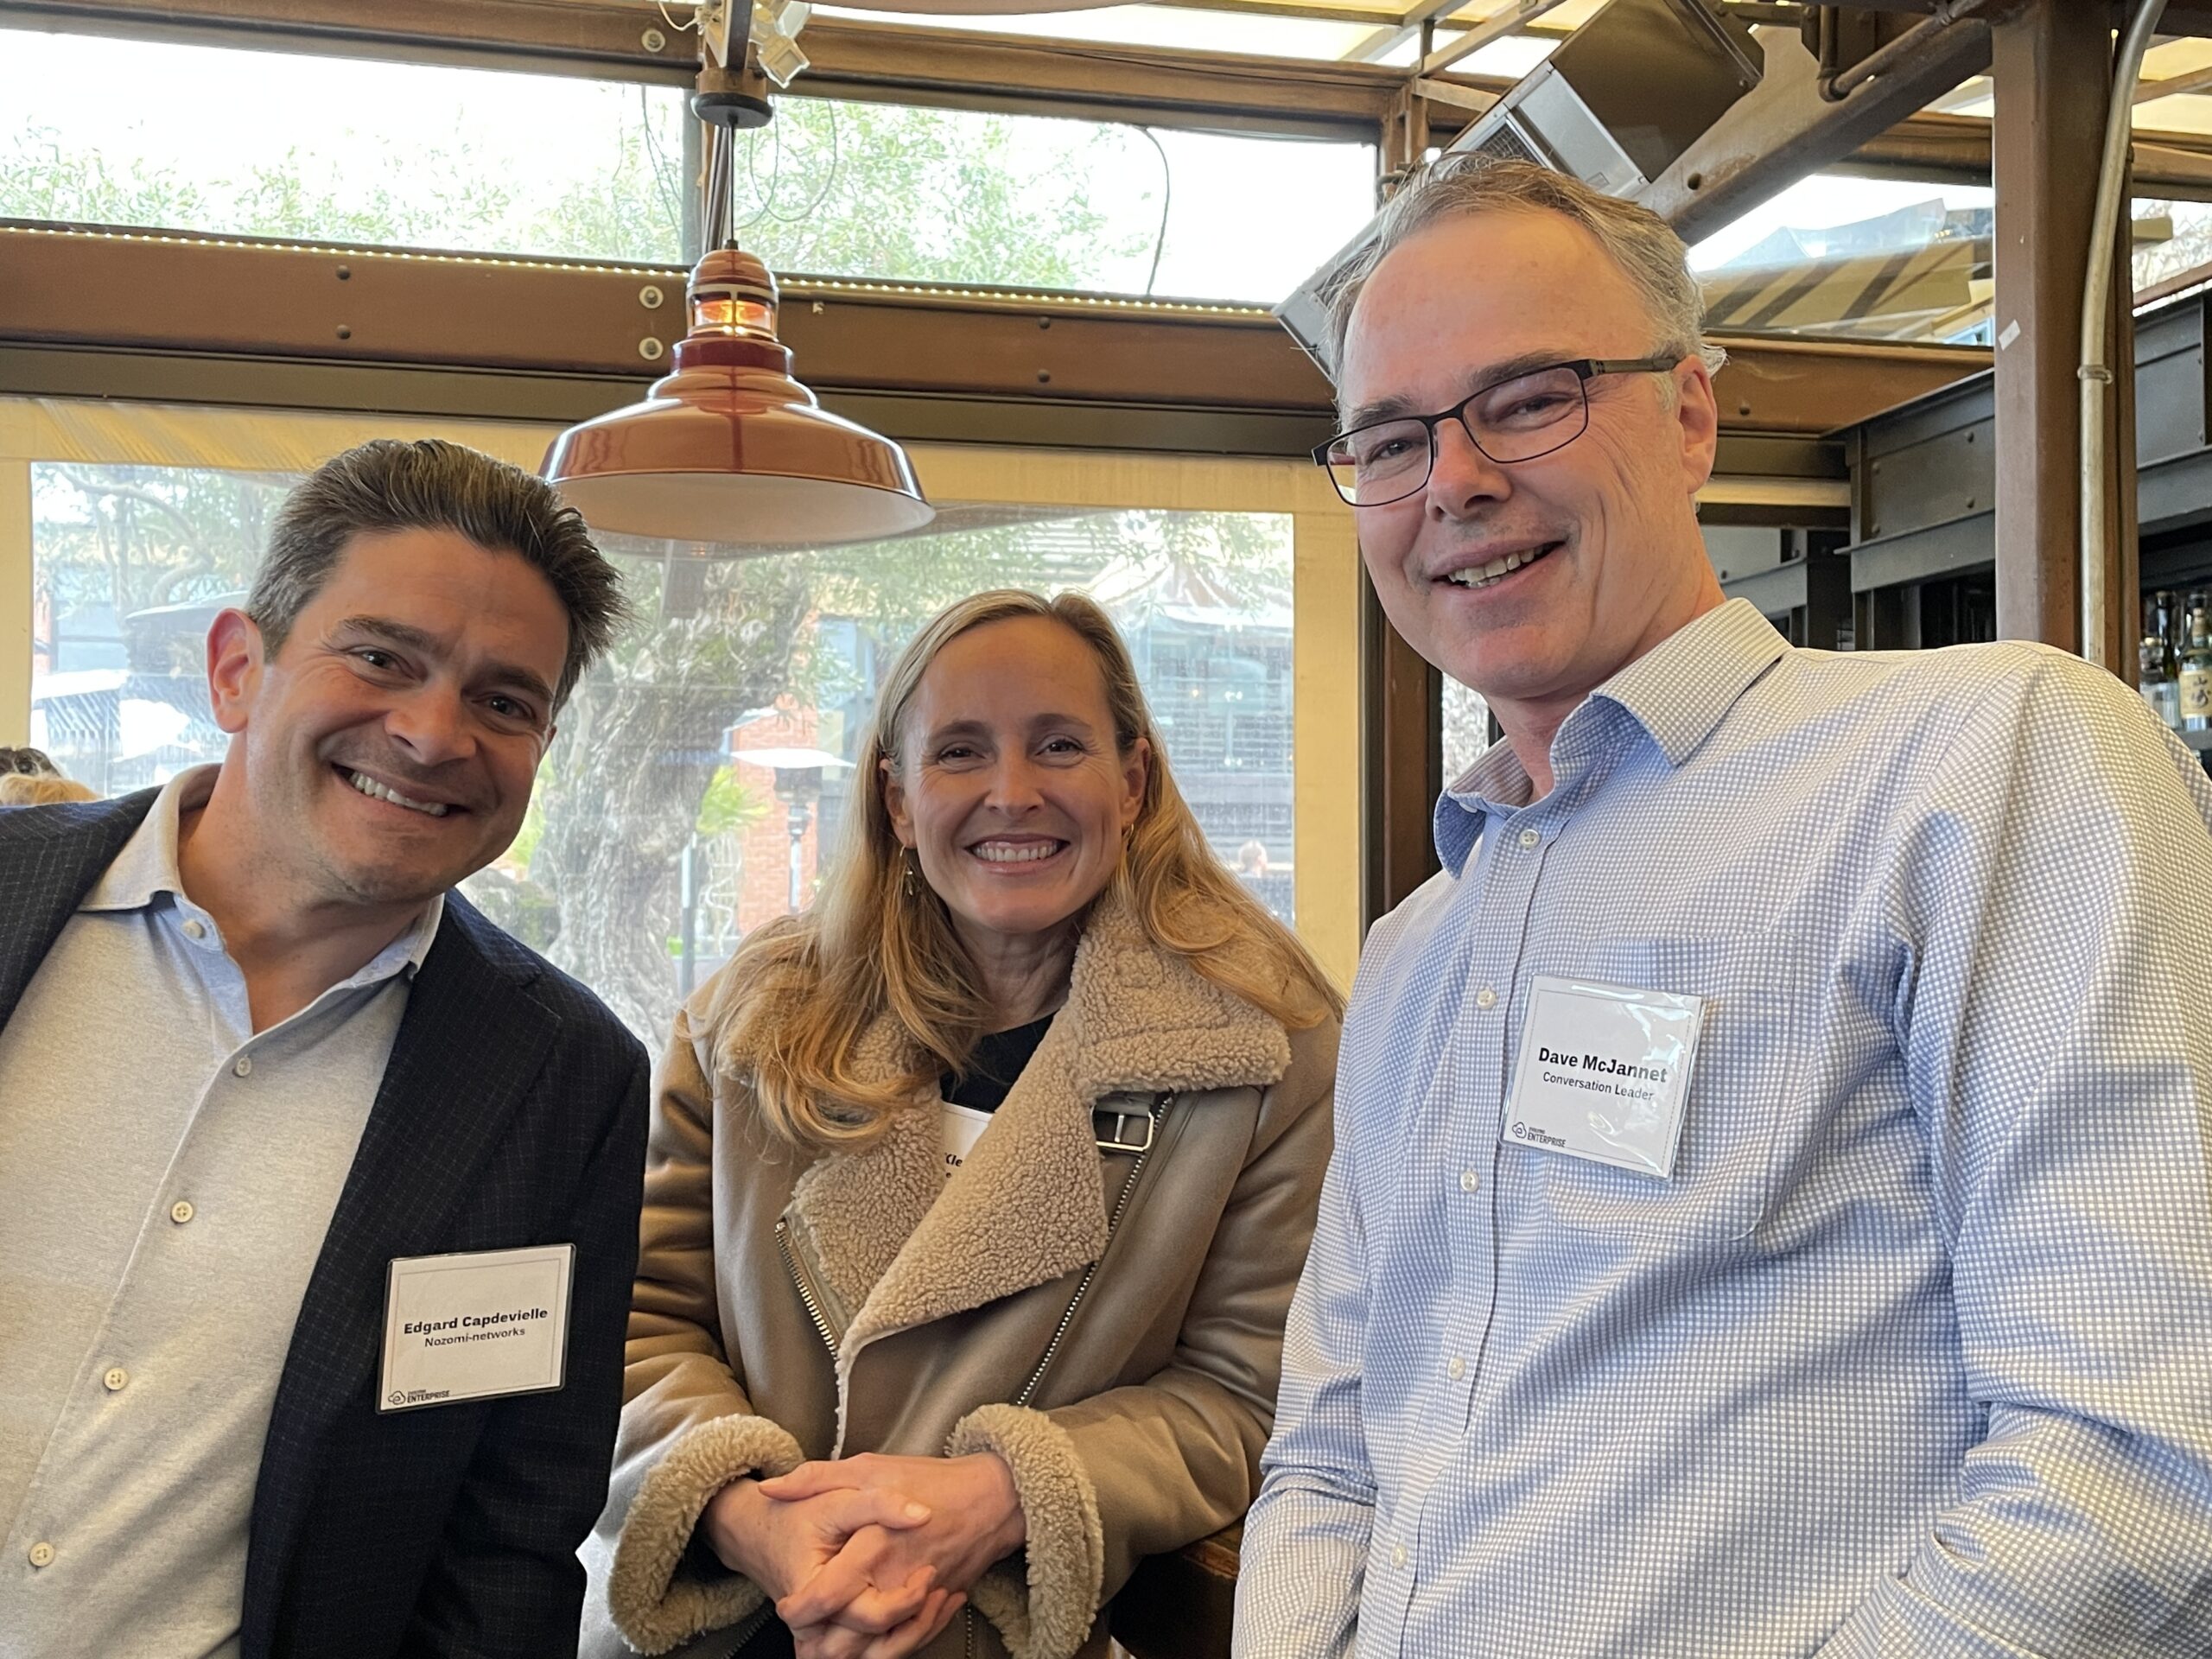 Nozomi's Edgard Capdevielle with Figma's Amanda Kleha and HashiCorp's Dave McJannet